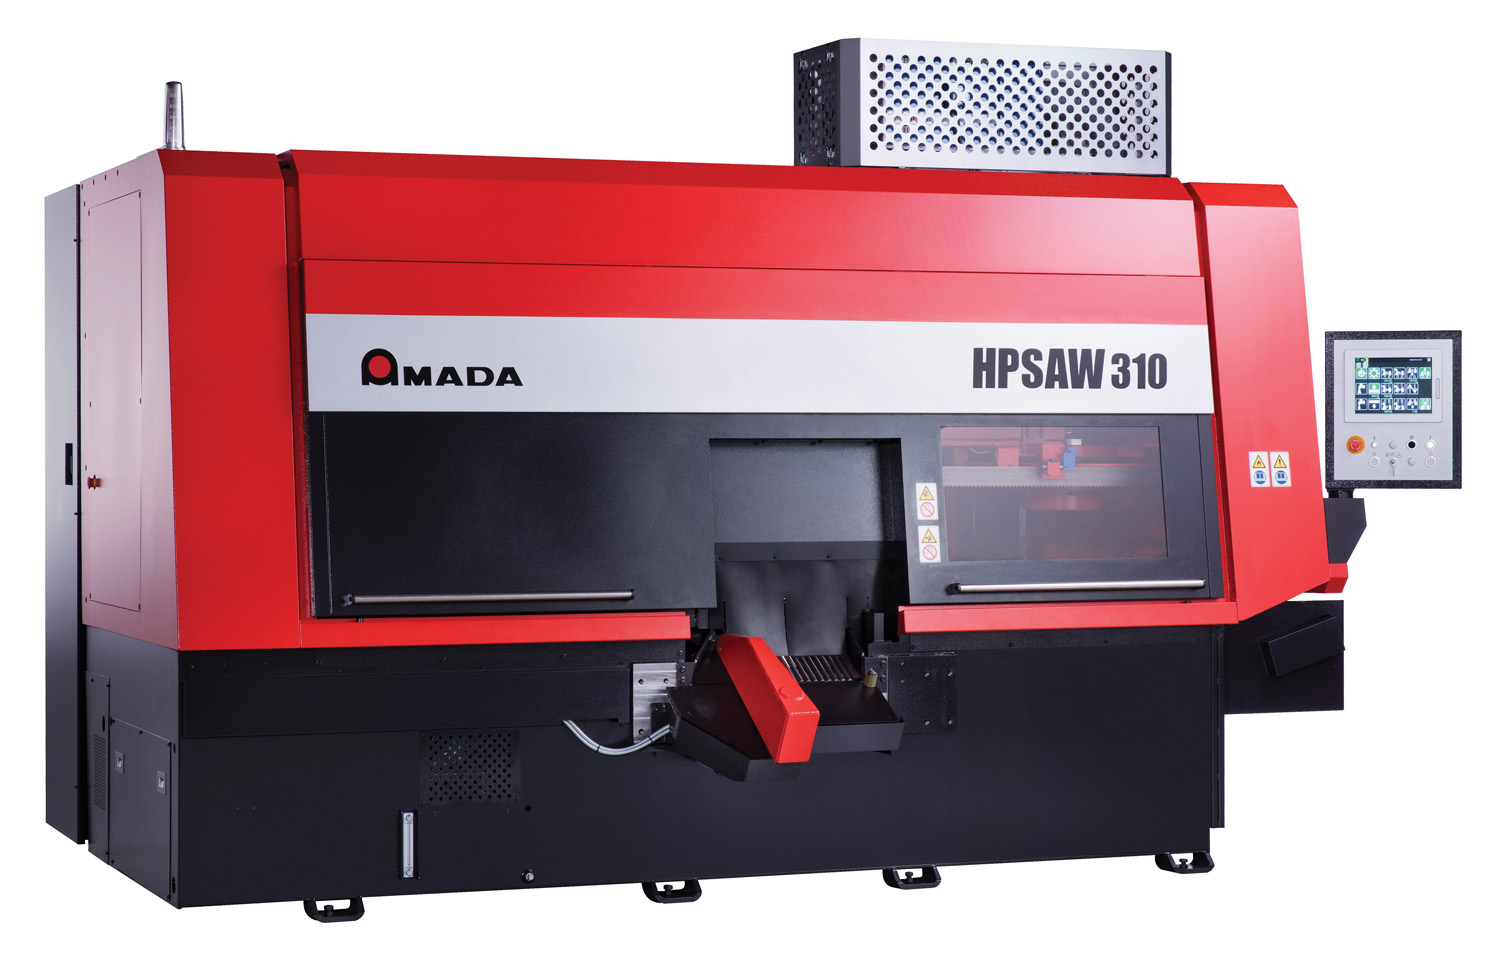 the HPSAW310 from Amada